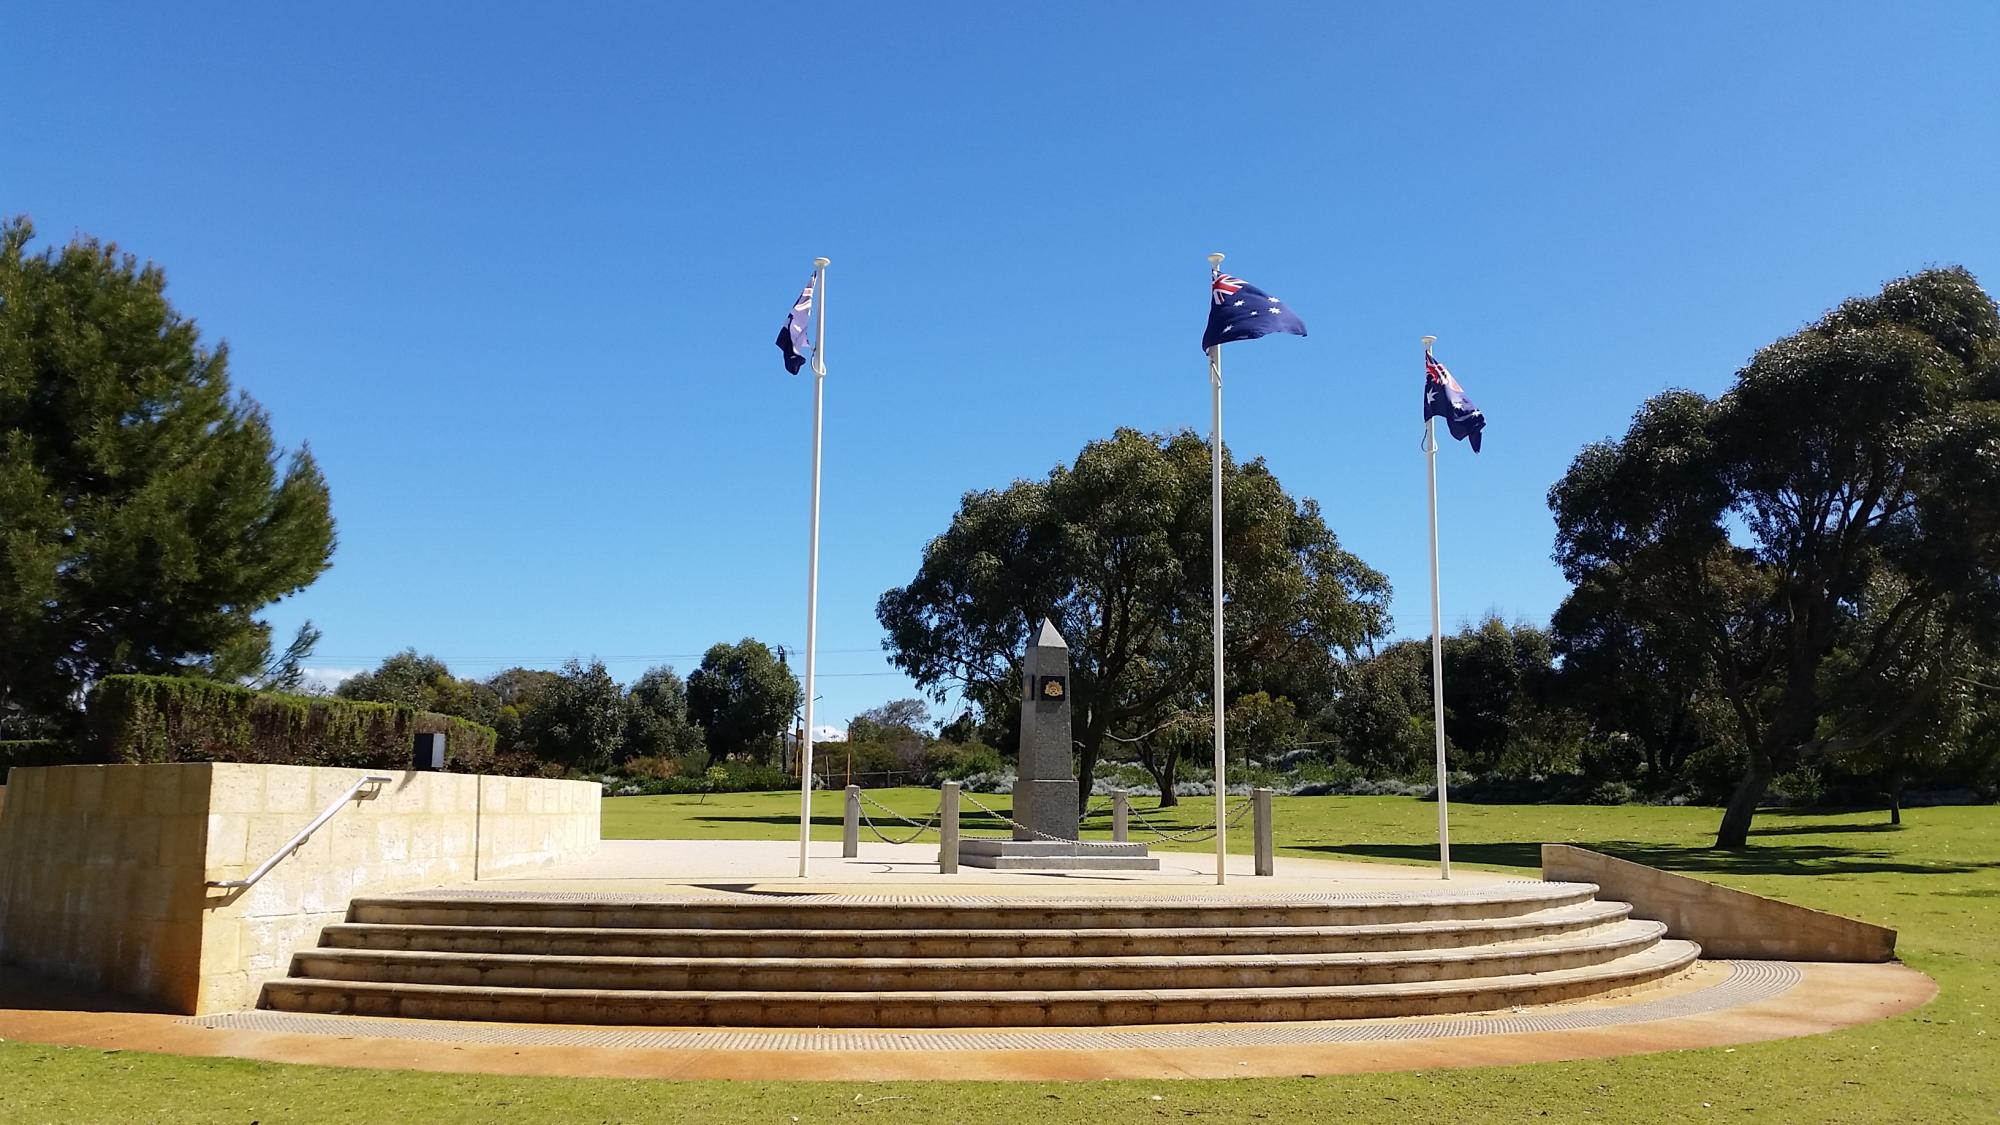  war memorial located in an open park with large trees in the background and three flagpoles with Australian flags flying.